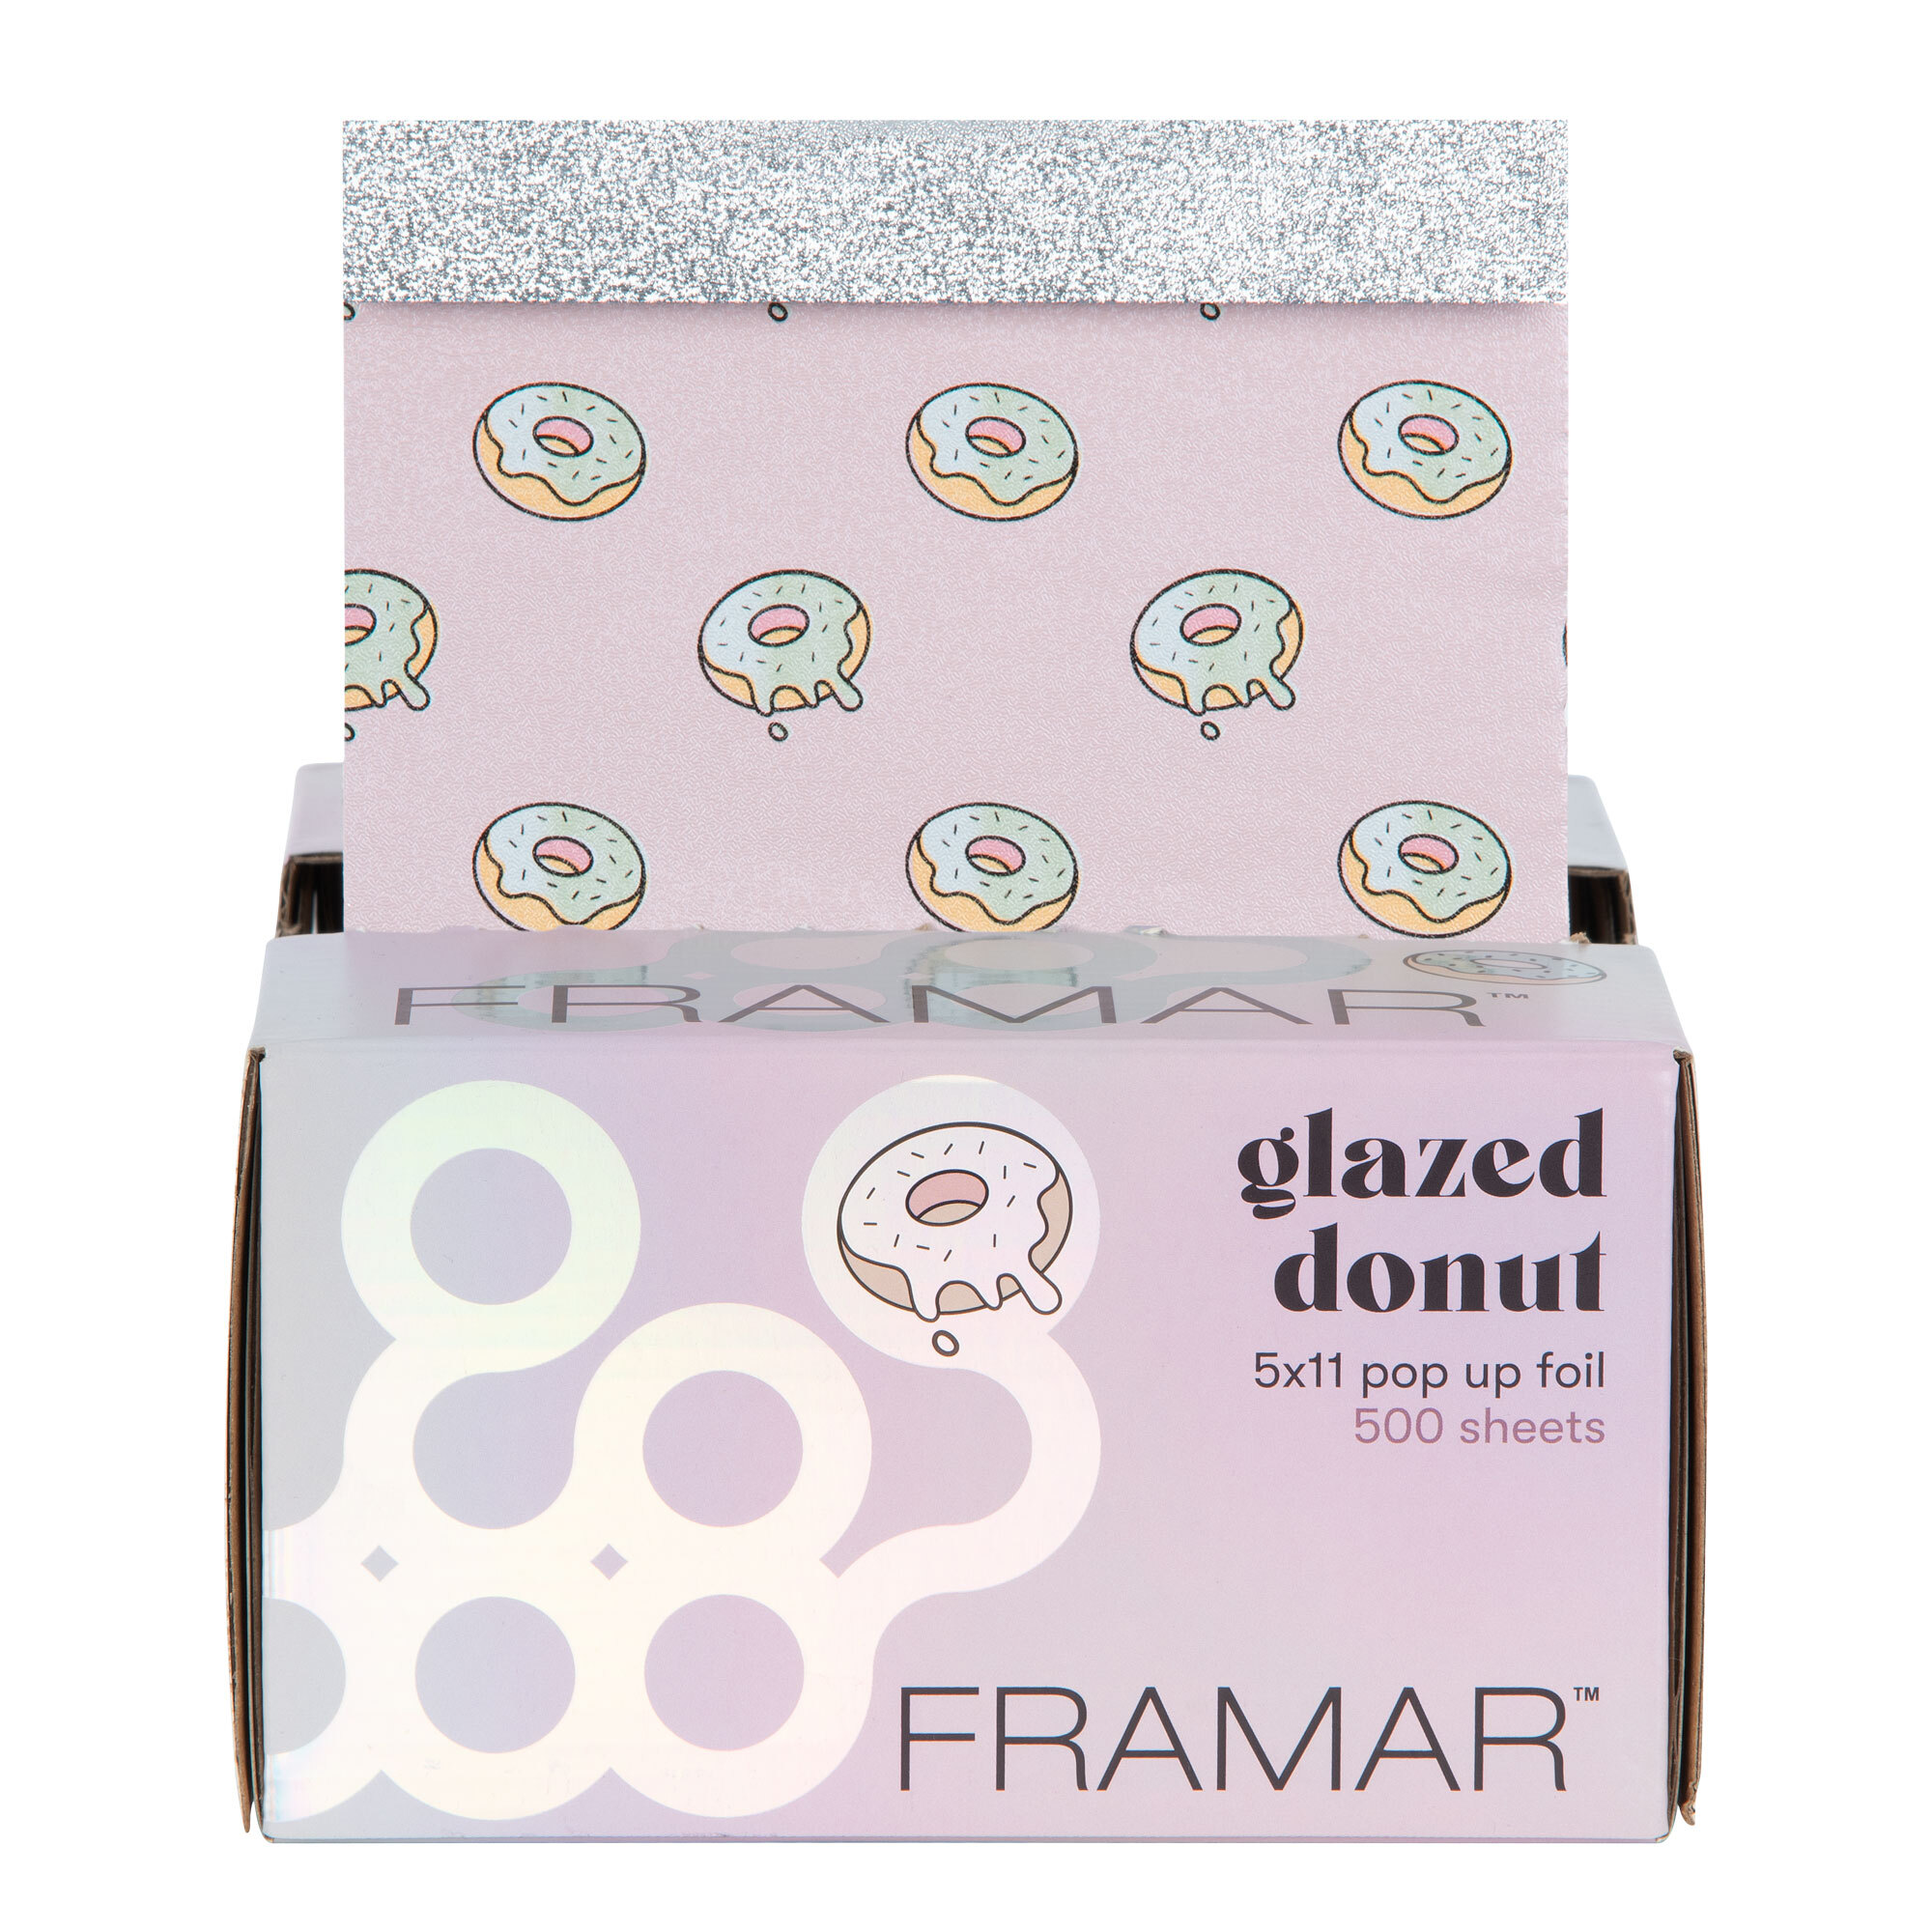 Framar Cheers, Haters! Pop Up Foil 500pk 5x11 - Haircare Group